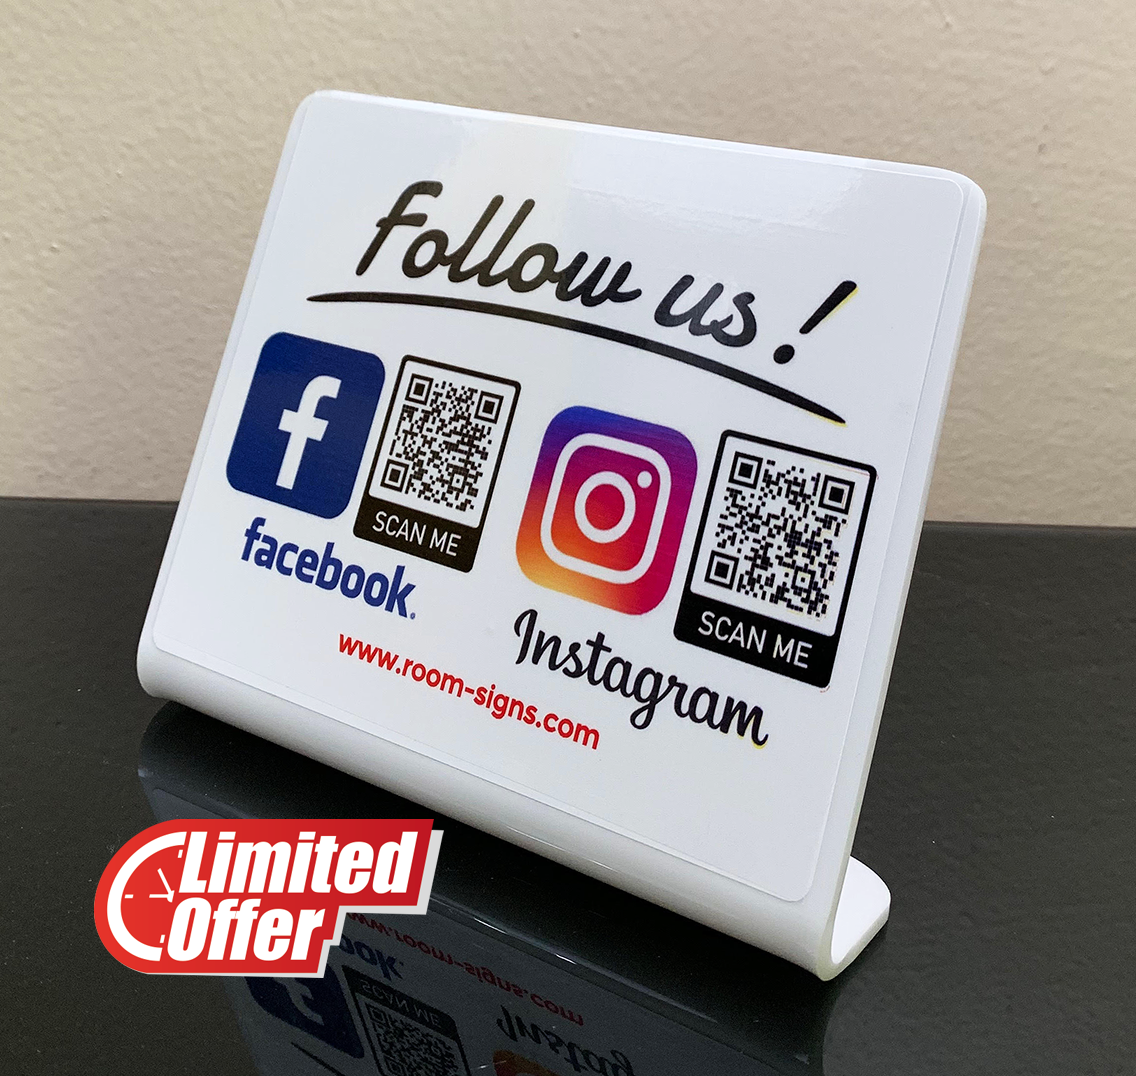 Follow us on Instagram and Facebook!